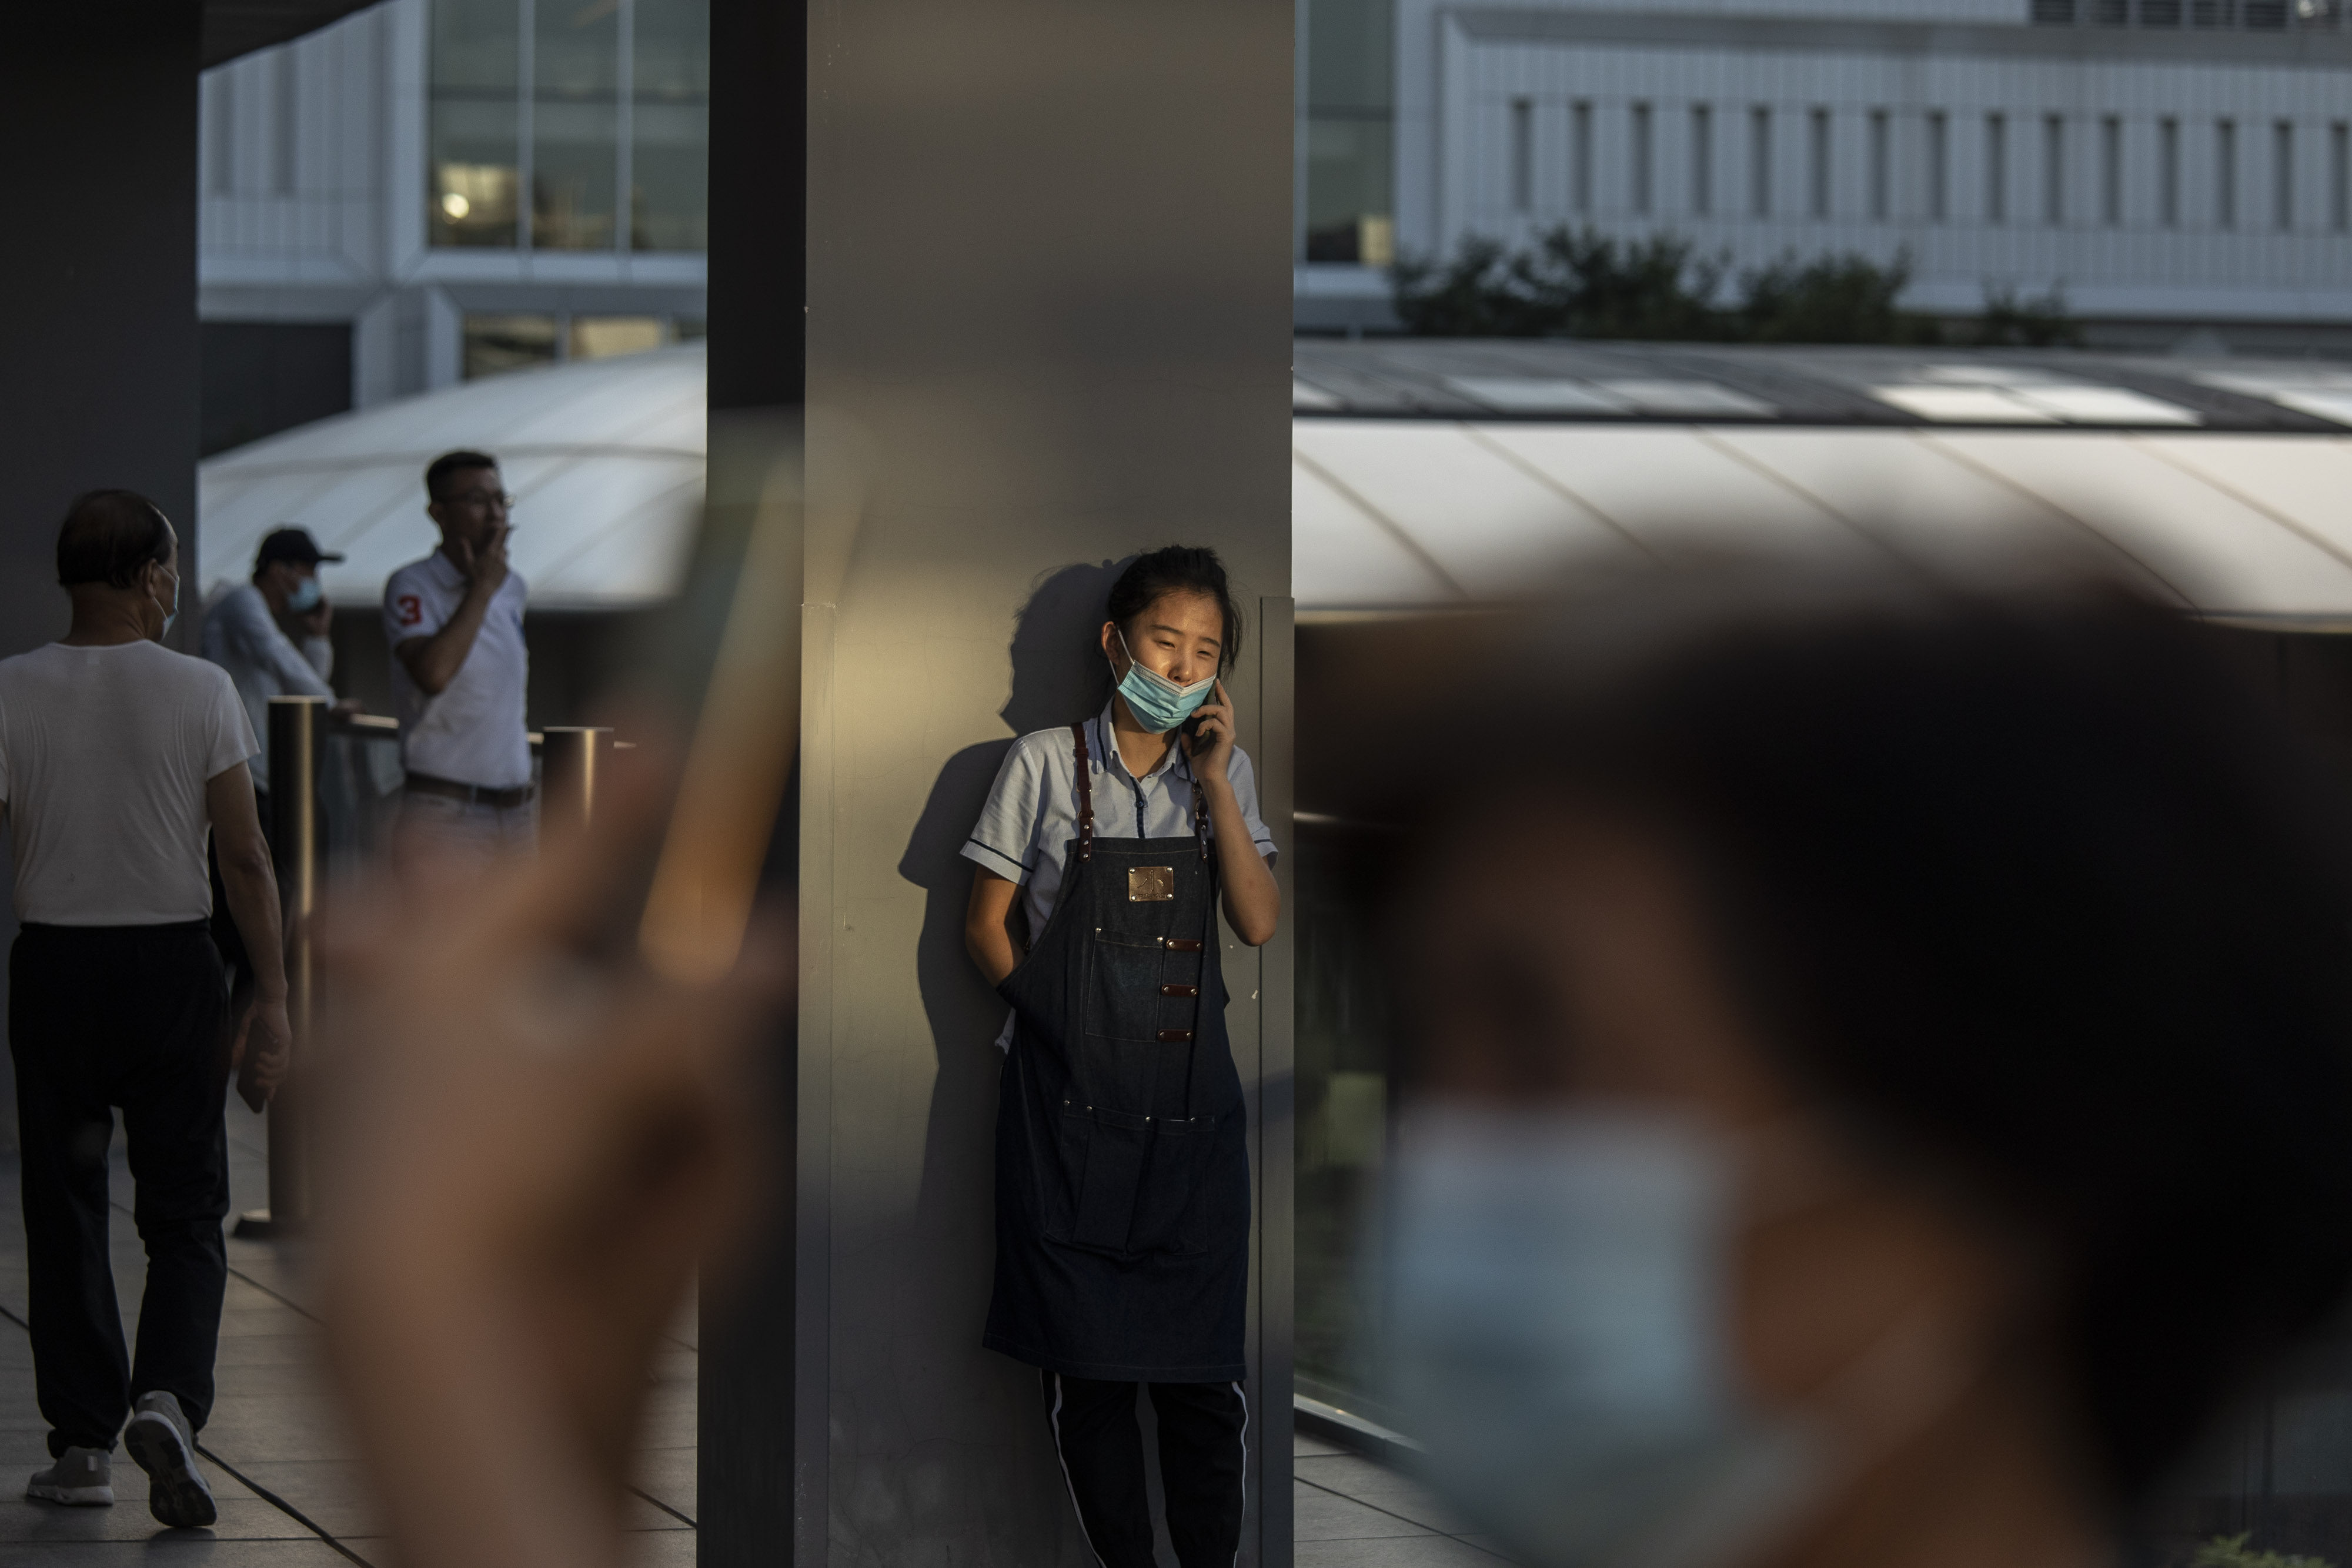 A young worker takes a break in Beijing, China, on August 25, 2021. A Stanford study found that China ranks low globally for social mobility. Photo: Bloomberg